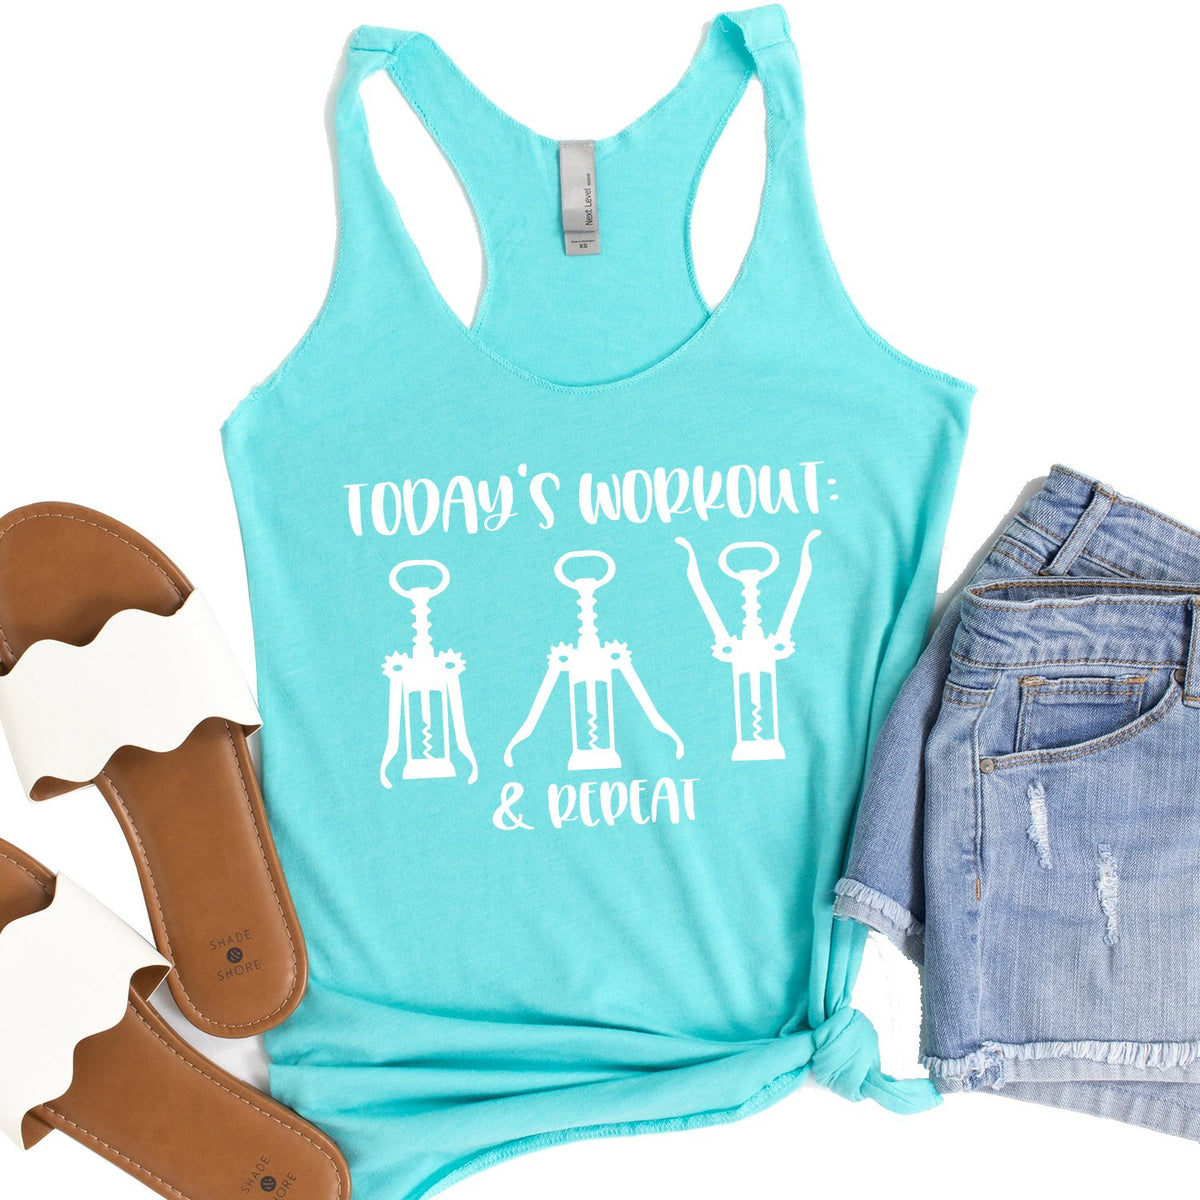 Today&#39;s Workout: Wine &amp; Repeat - Tank Top Racerback